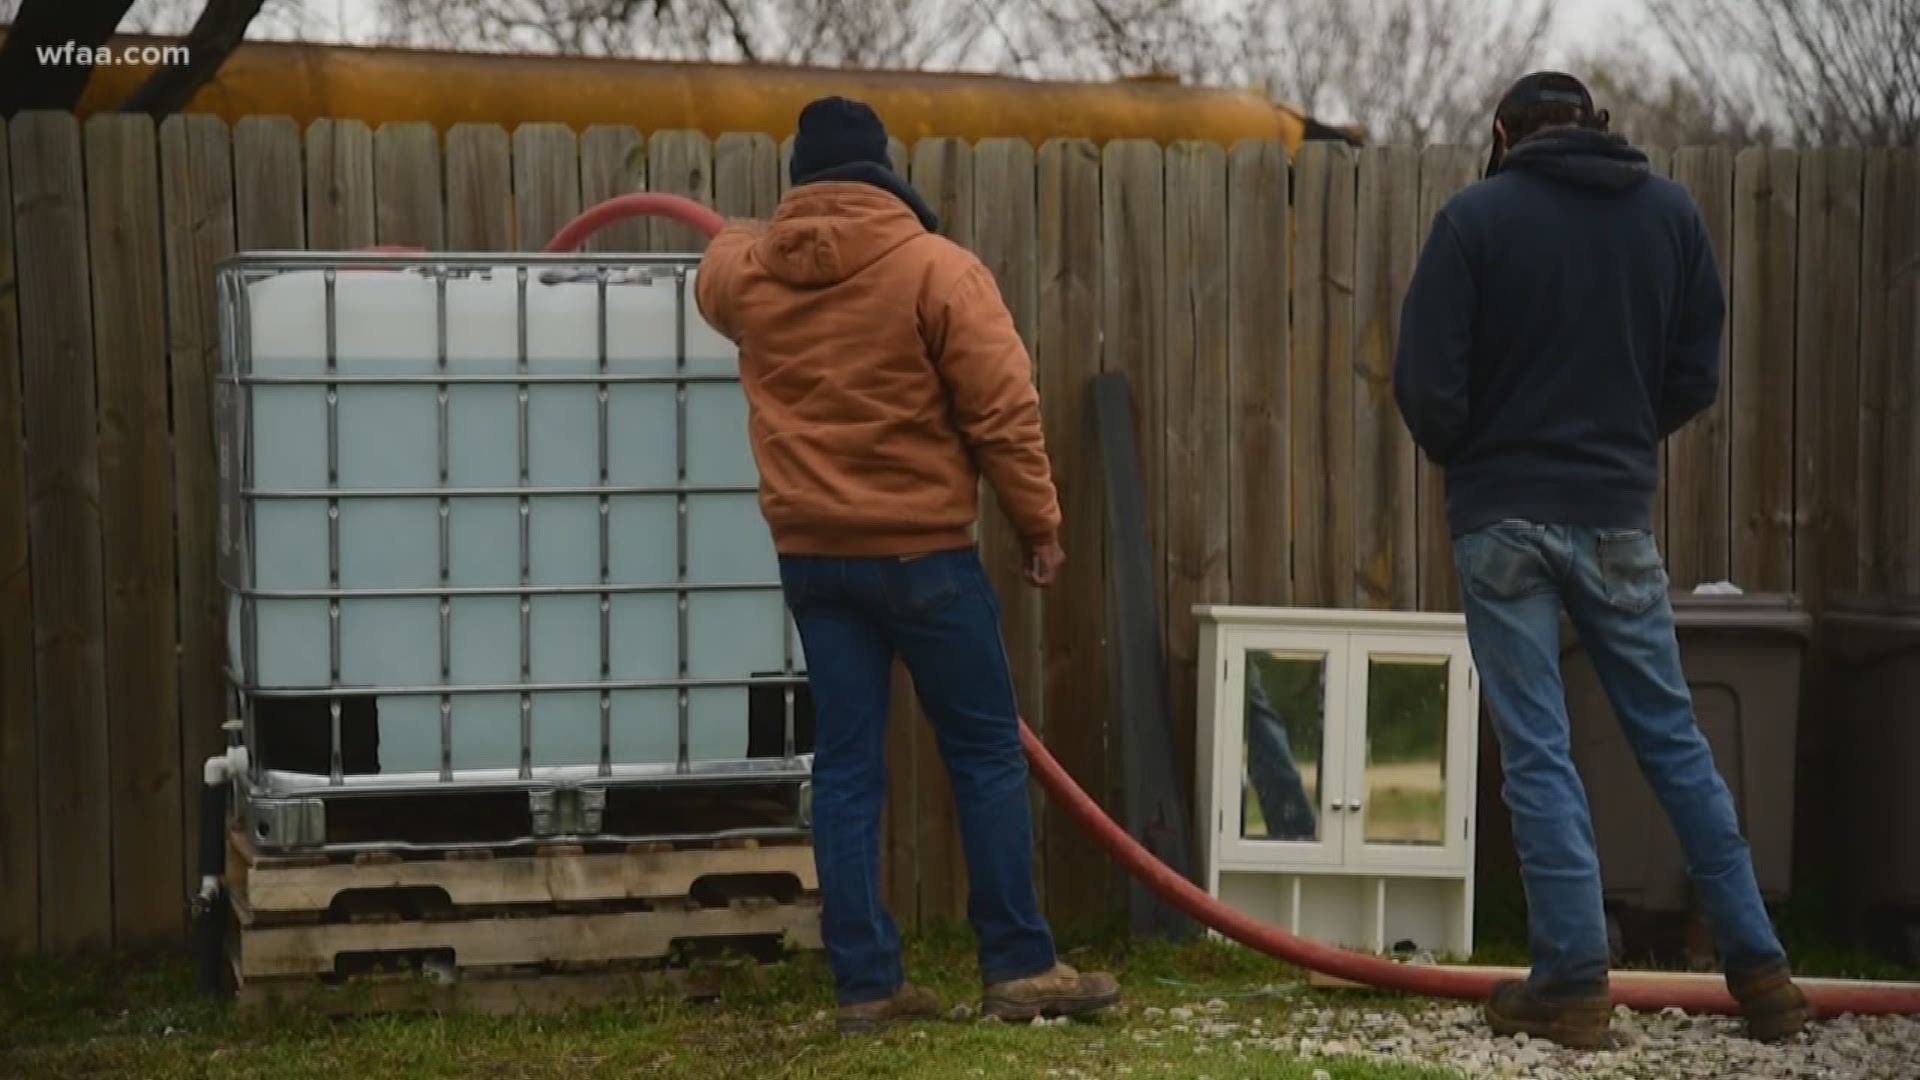 The City of Denton issued a state of emergency after residents were left without running water when the owner of a well shut it down in November.